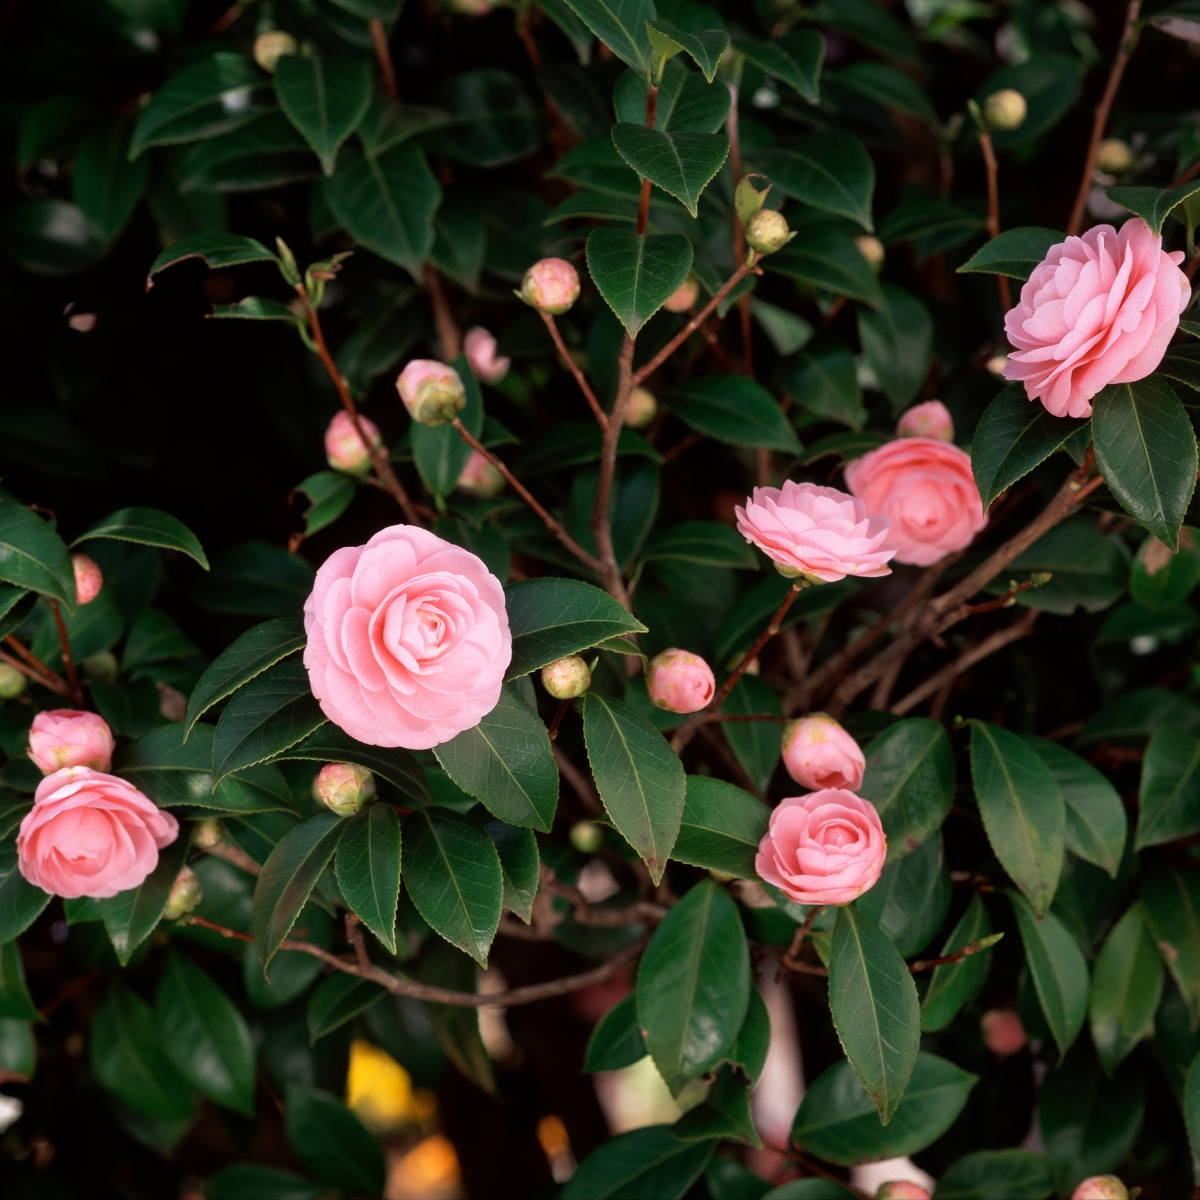 numerous buds on pink camellia shrub